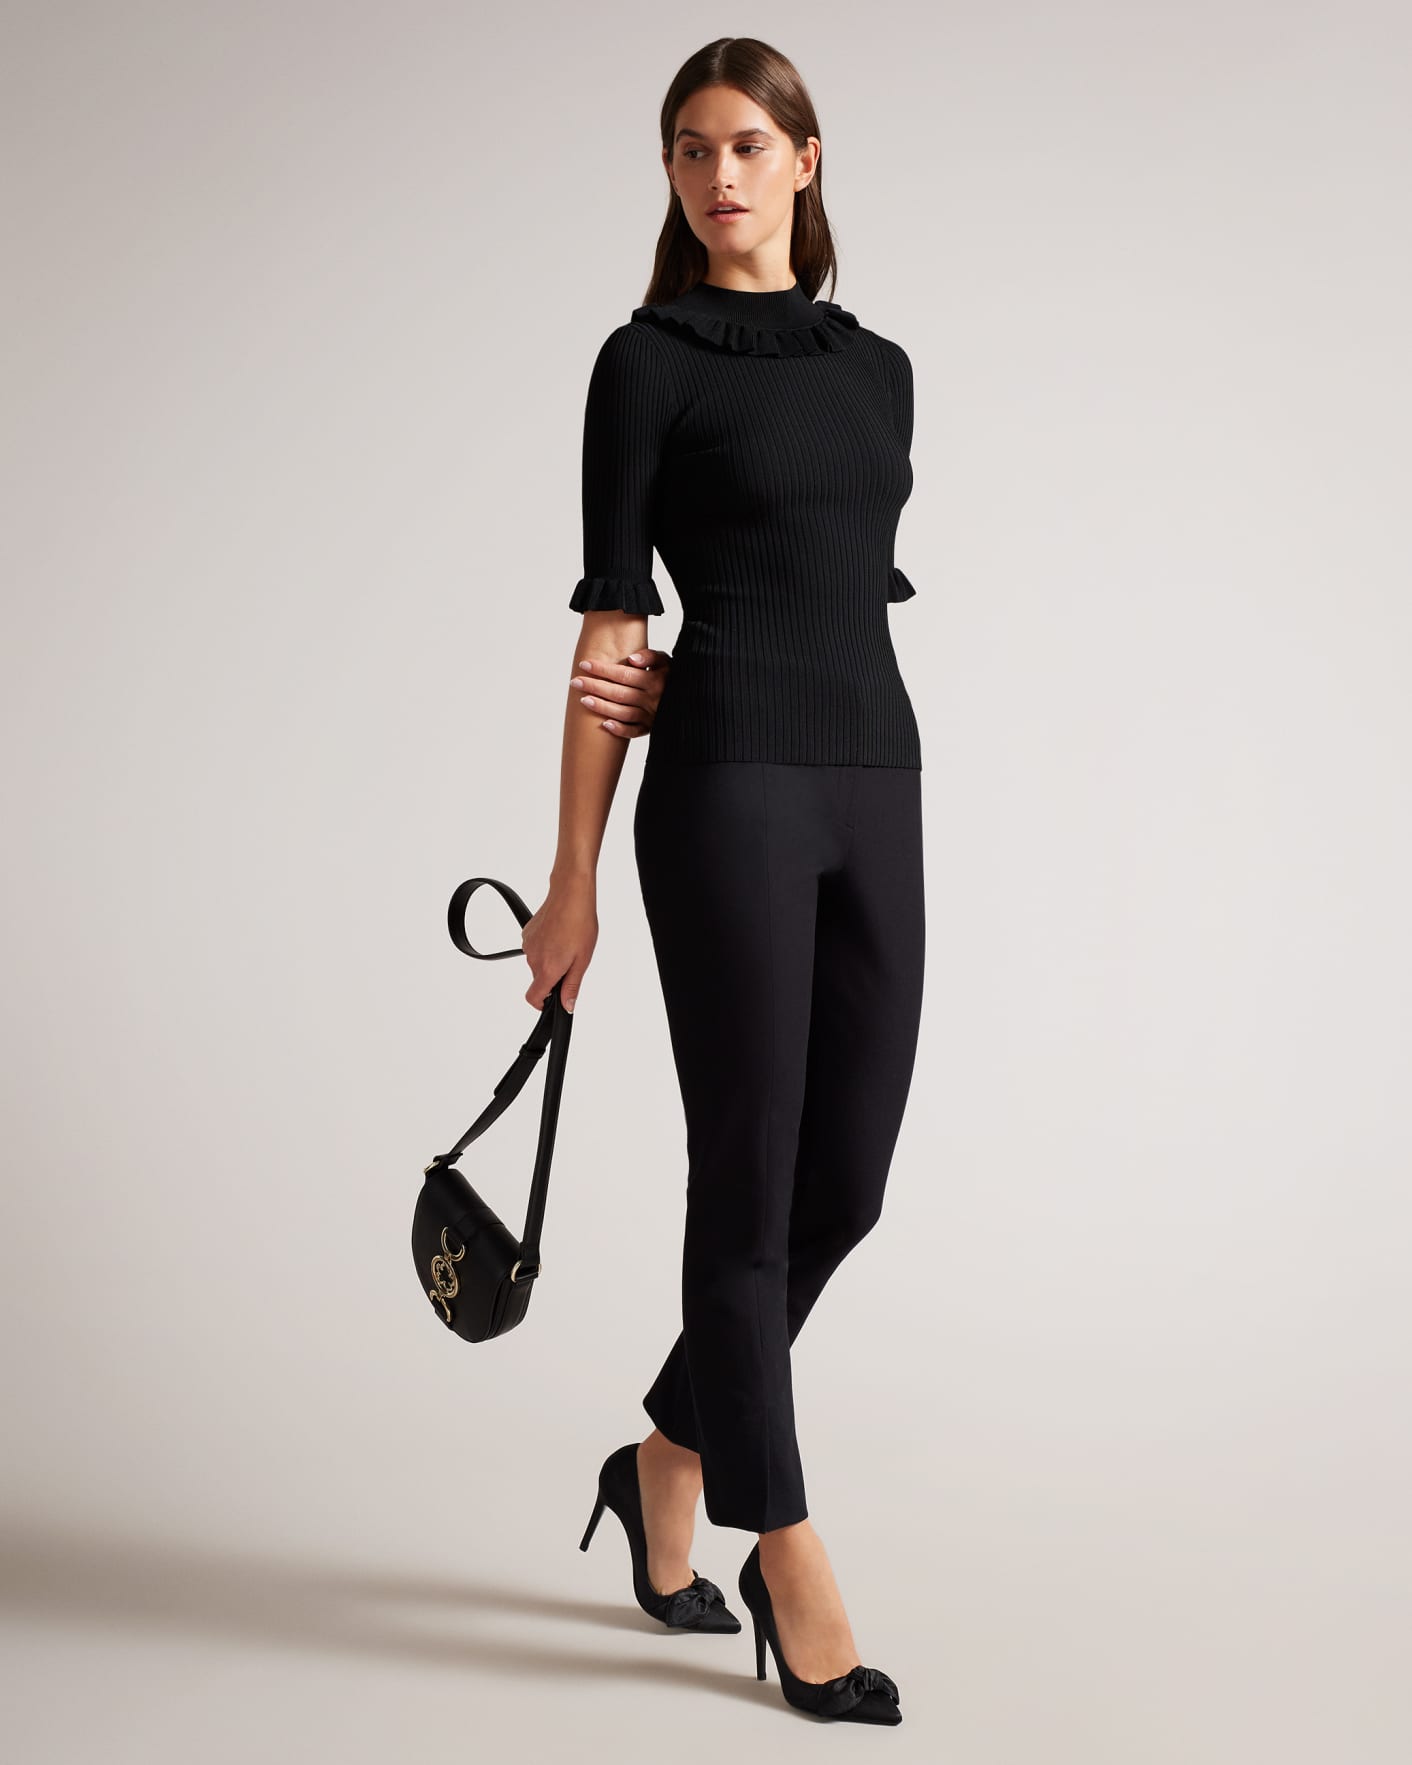 Black Fitted Top With Frill Neck Detail Ted Baker